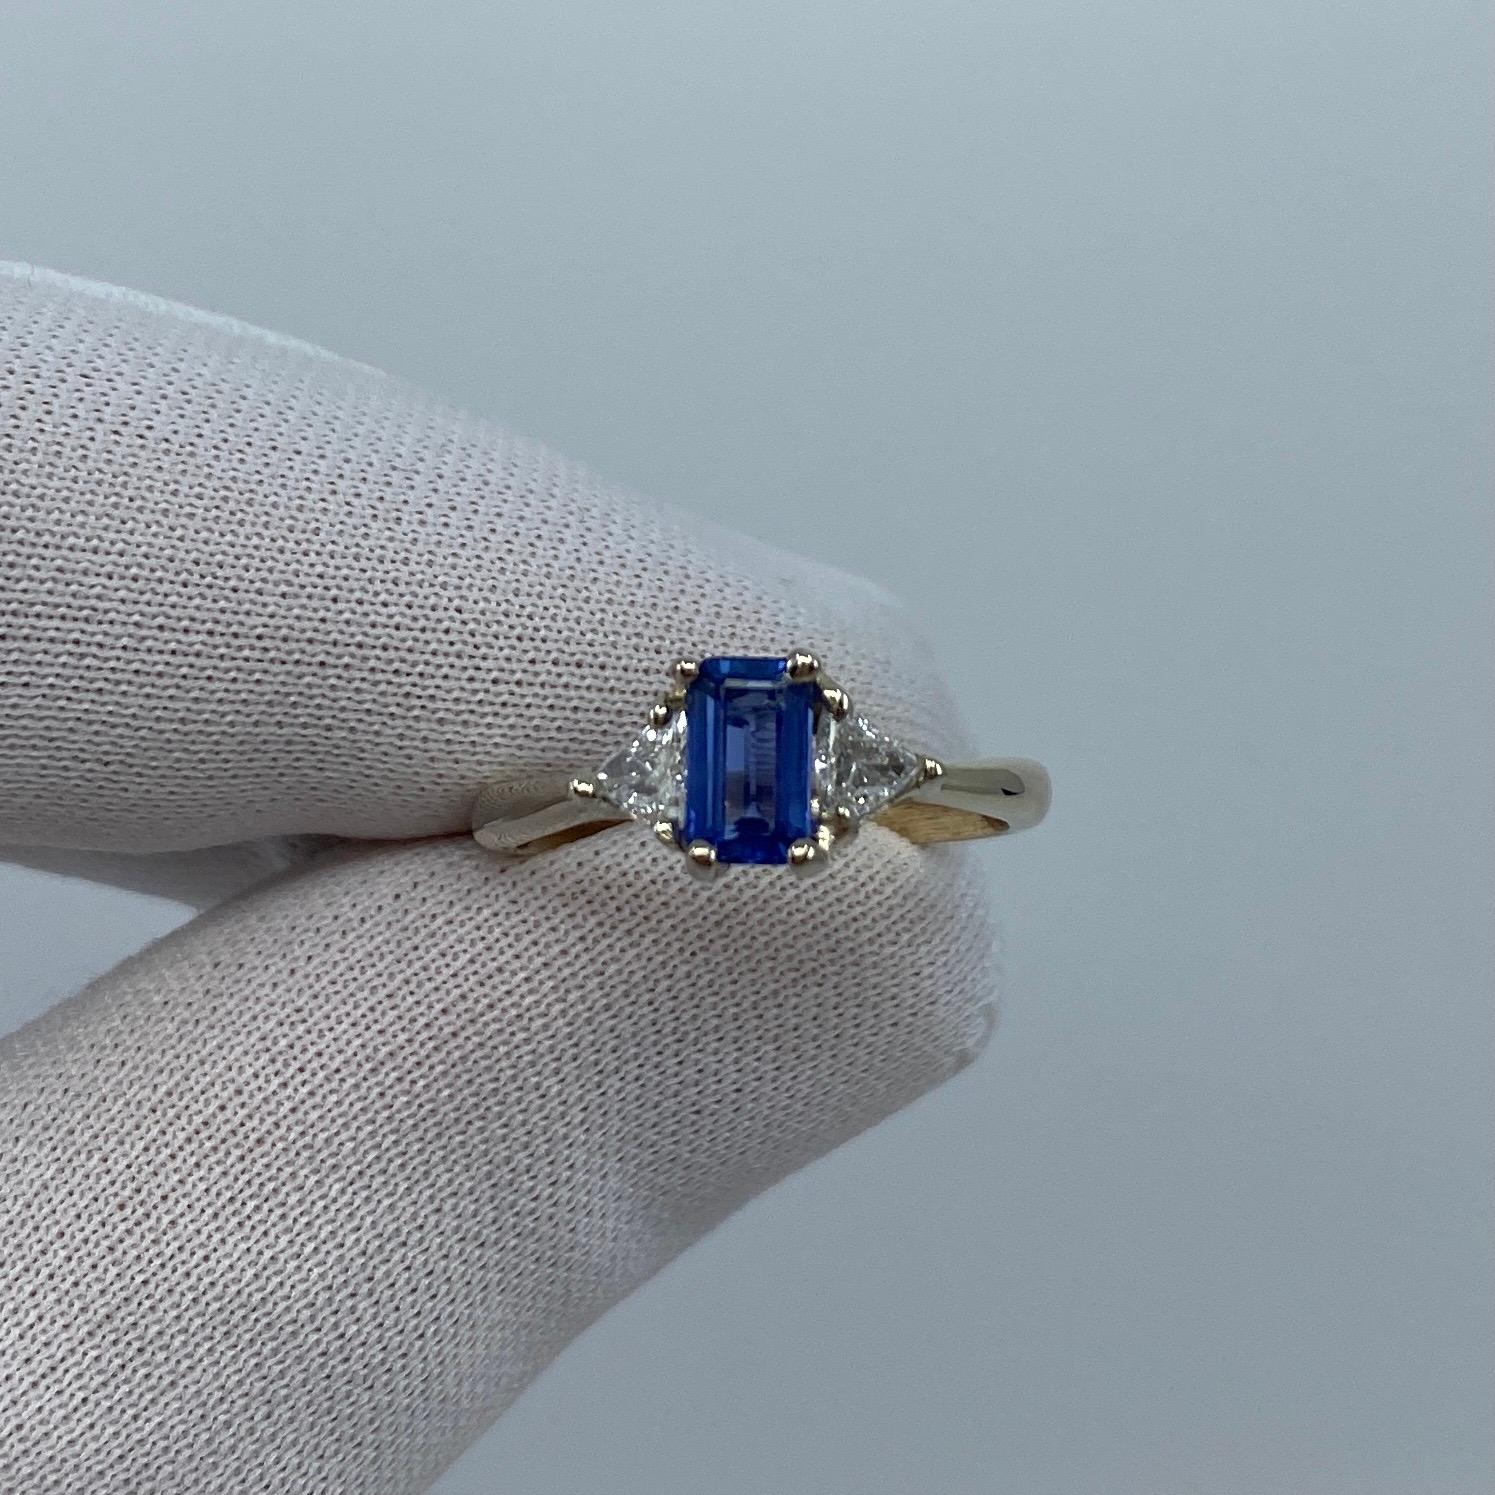 Ceylon Blue Sapphire & Diamond 3 Stone 18k White Gold Handmade Ring

1.25 Total carat weight. 0.75 Carat centre sapphire with a bright cornflower blue colour and very good clarity, a very clean stone with only some small natural inclusions visible